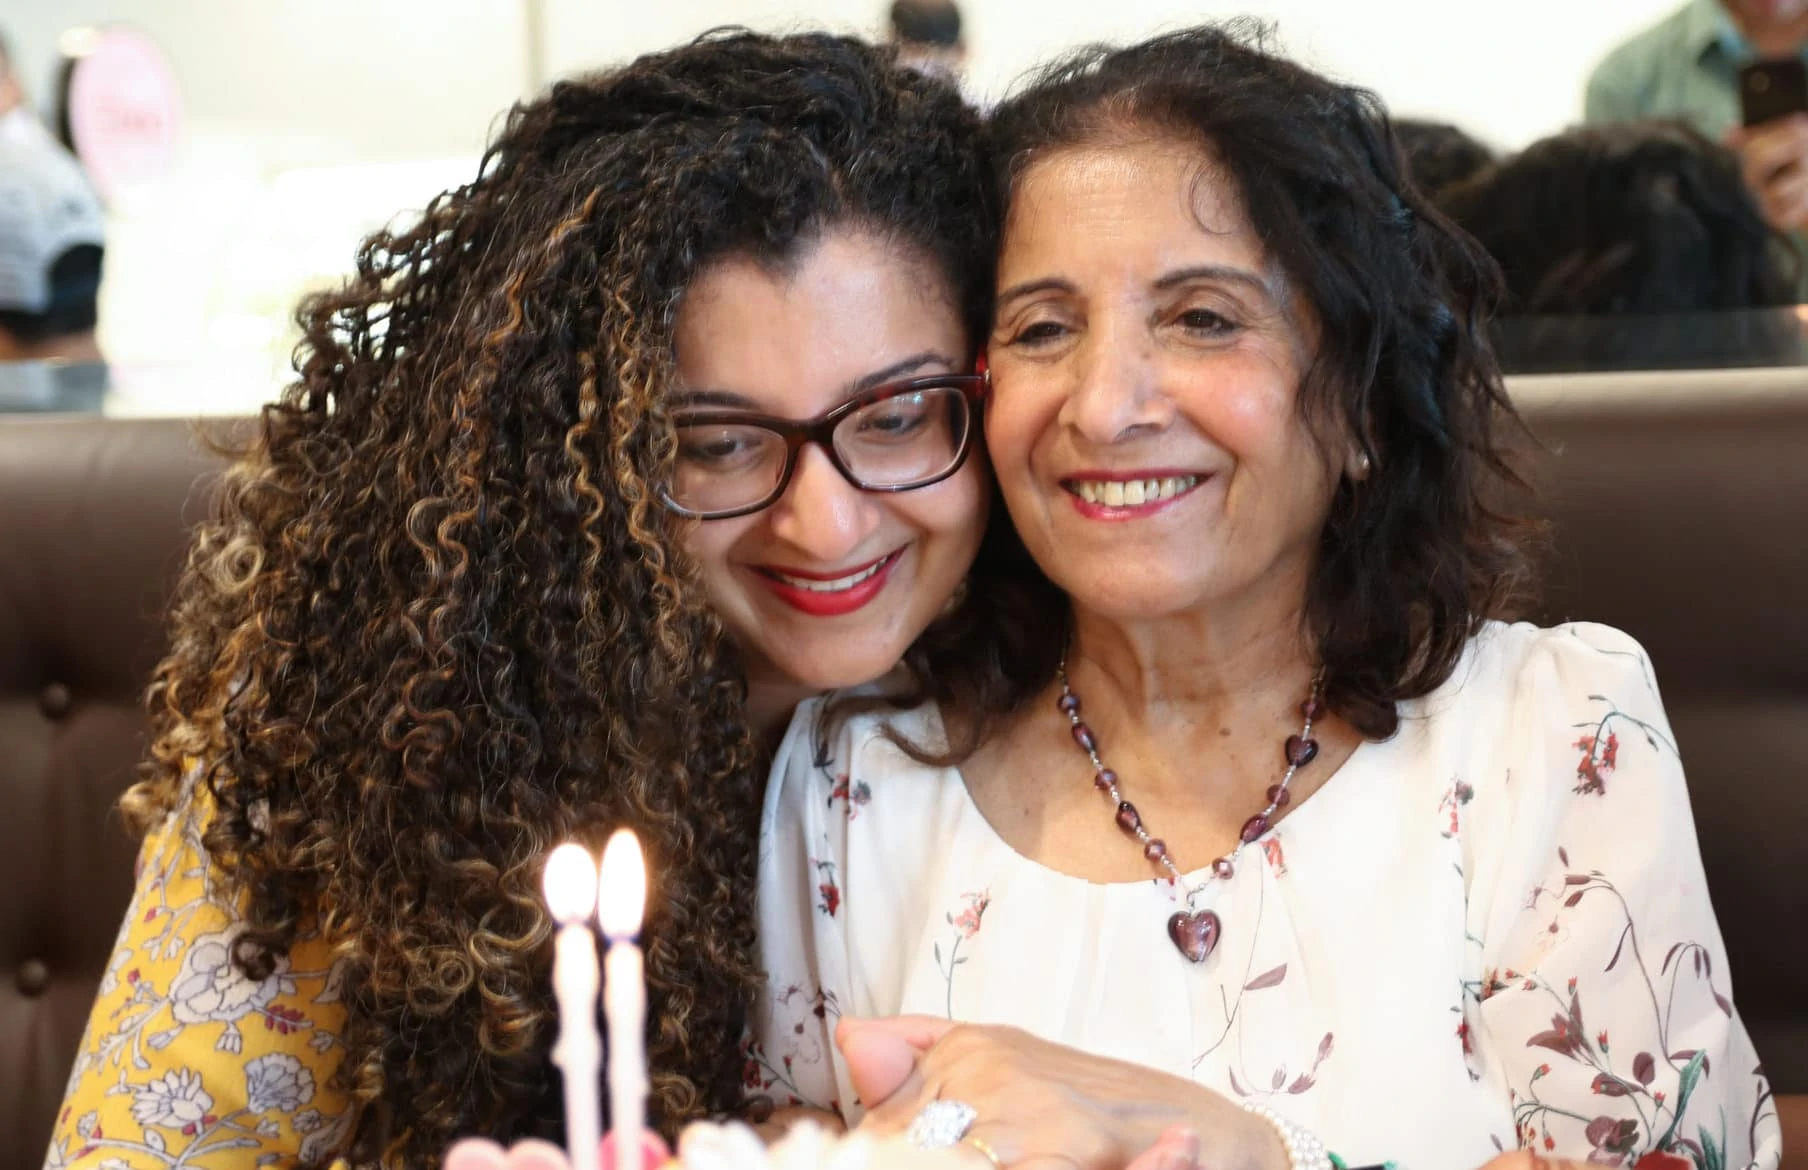 On Mother's Day, a mother and daughter snuggling in front of a cake with 2 candles